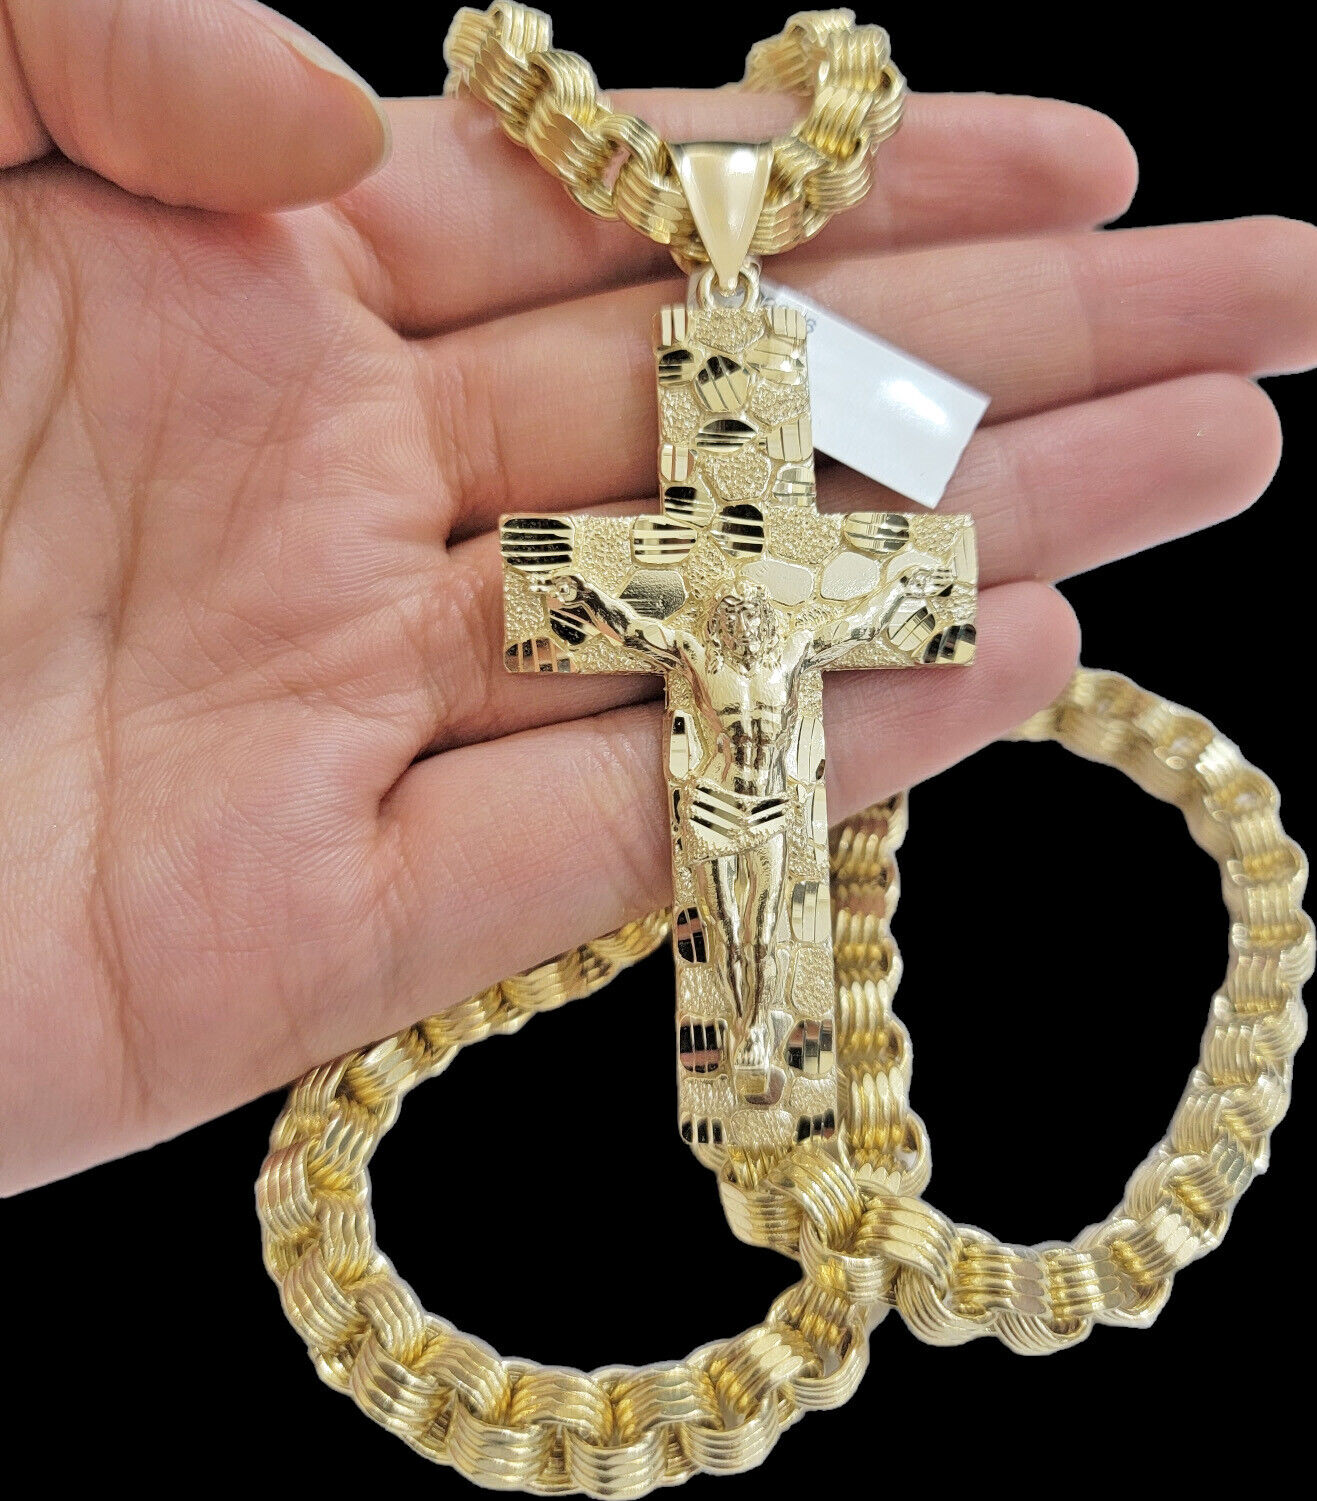 Real 10k Yellow Gold  Byzantine Chain Nugget Cross Charm Pendant Necklace SETS